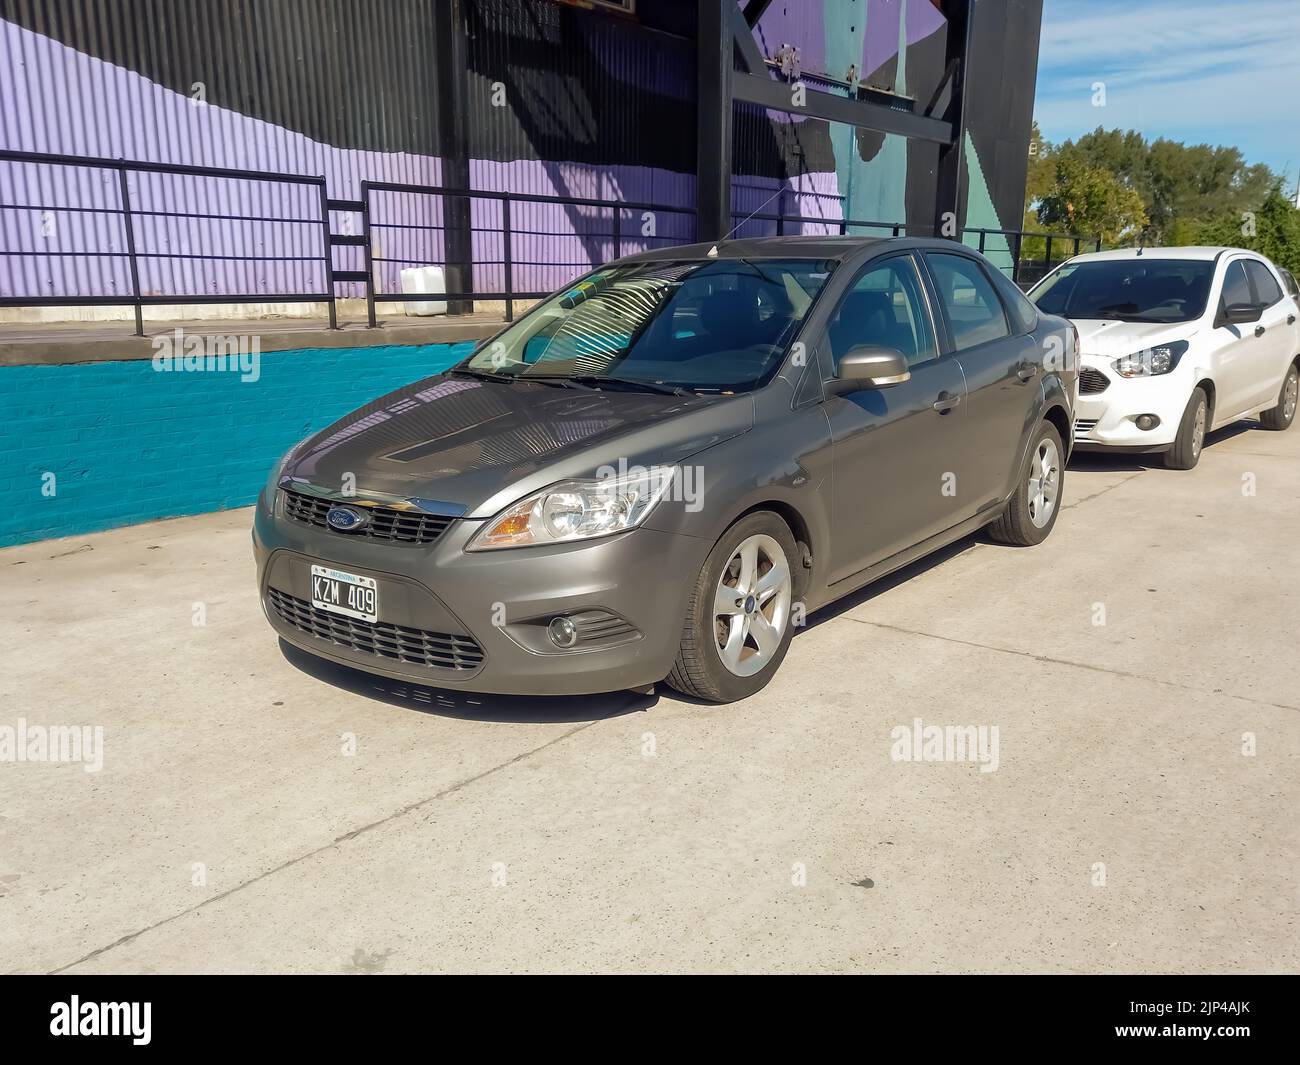 Gray car Ford Focus Hatch four door sedan late 2010s parked in a warehouse yard. Stock Photo